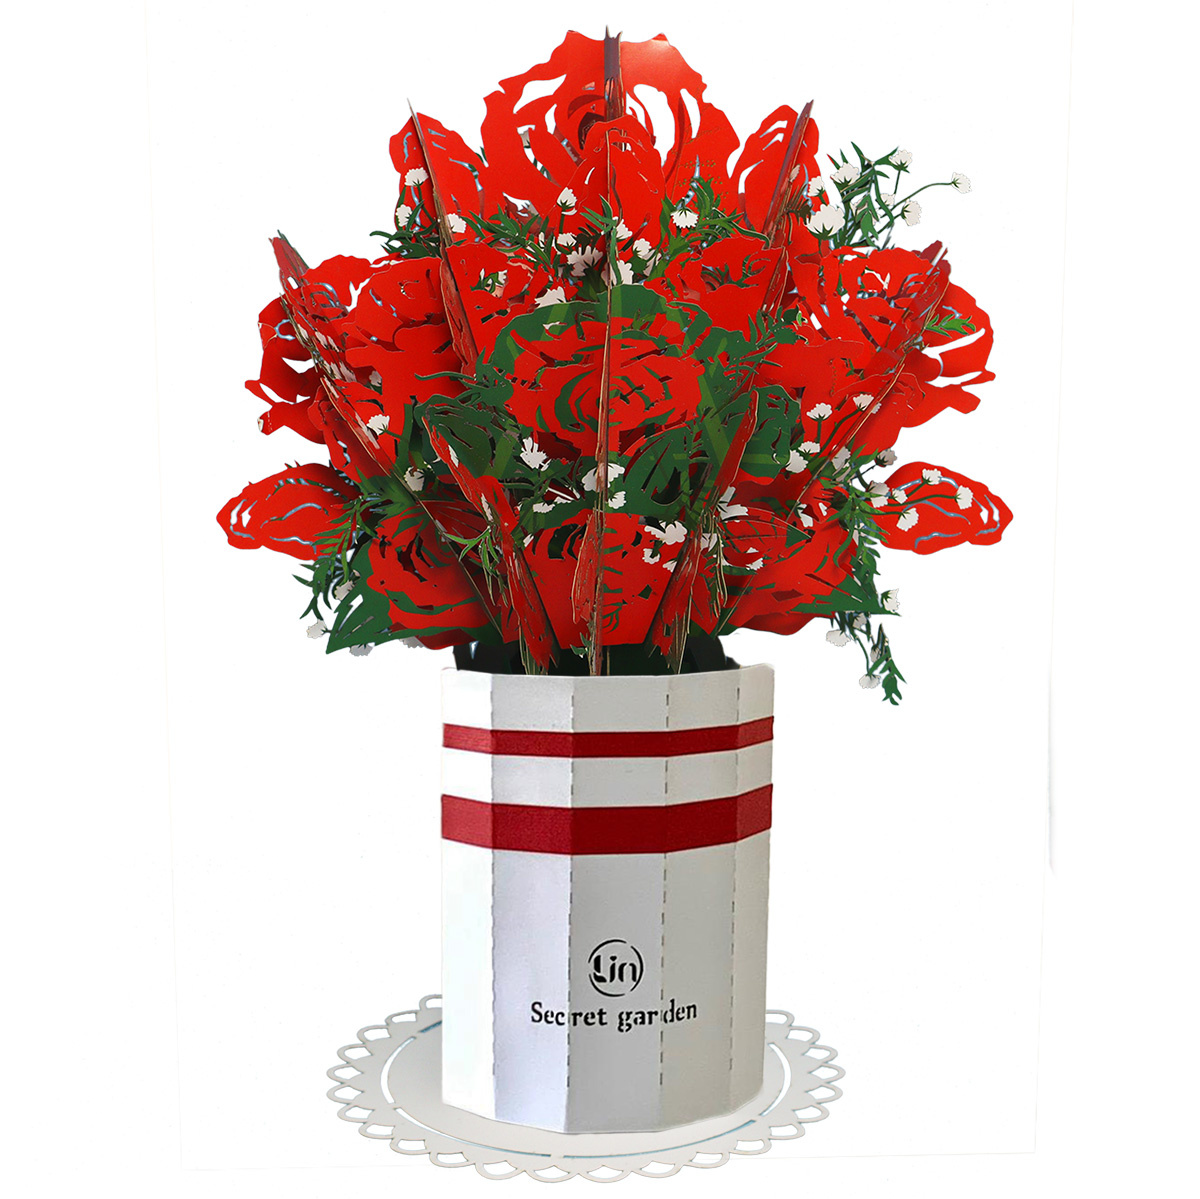 LINPOPUP LIN pop up flowers bouquet, handmade paper flowers incl. vase & saucer, as a gift for birthday, mother's day, get well, thank you, paper bouquet -rose bouquet, LIN17900, LINPopUp®, N800